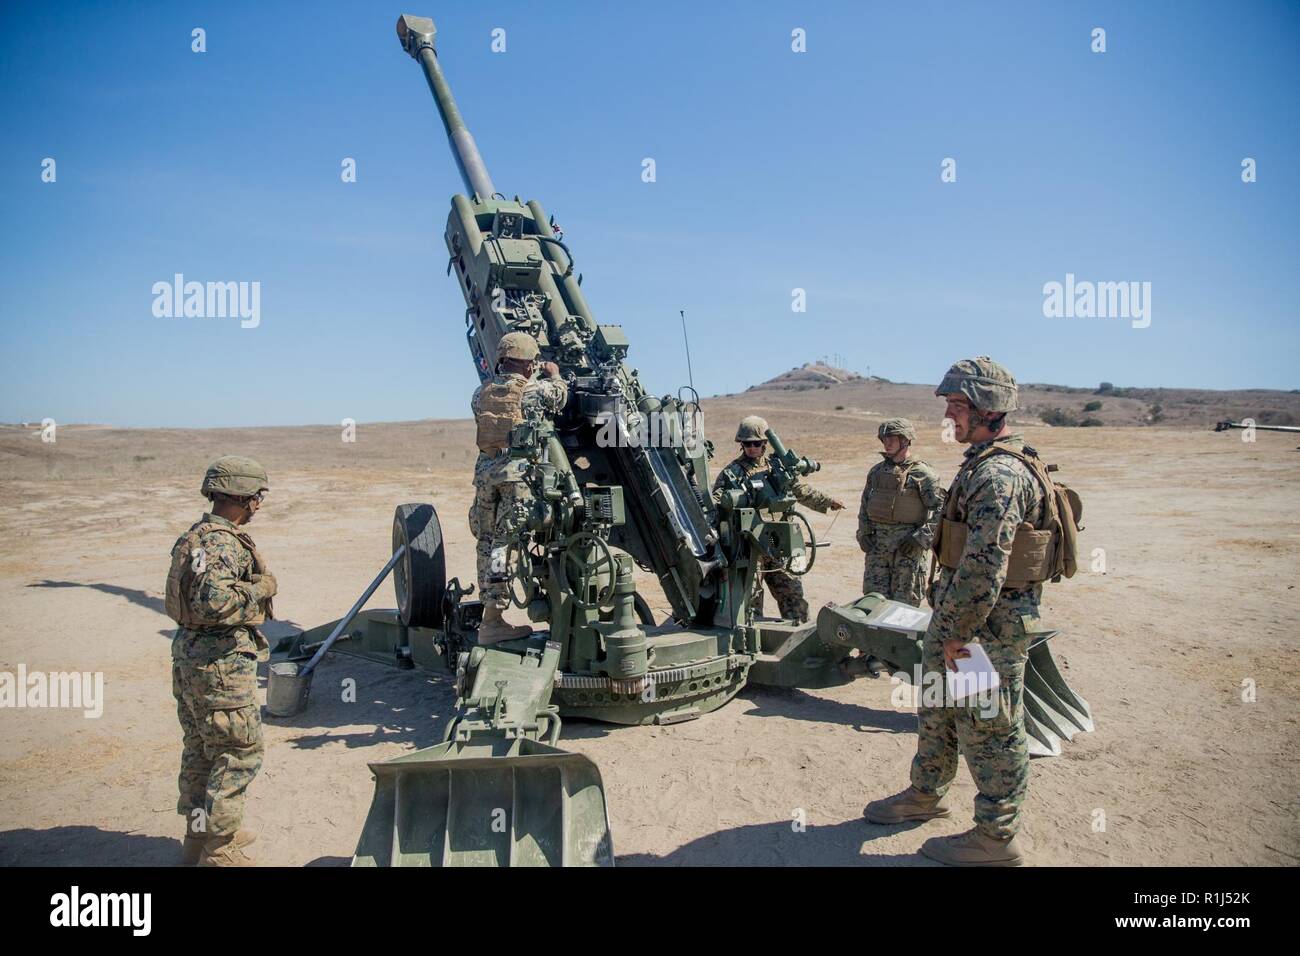 U.S. Marines with India Battery, 3rd Battalion, 11th Marine Regiment, 1st Marine Division, are being evaluated on proper maintenance of an M777 155mm Howitzer cannon during a Cannon Section Chief Course at Artillery Fire Area 18, Marine Corps Base Camp Pendleton, California, Sept. 27, 2018. The section chief is responsible for the safety of each Marine operating the Howitzer along with the training and proficiency of the section. Stock Photo